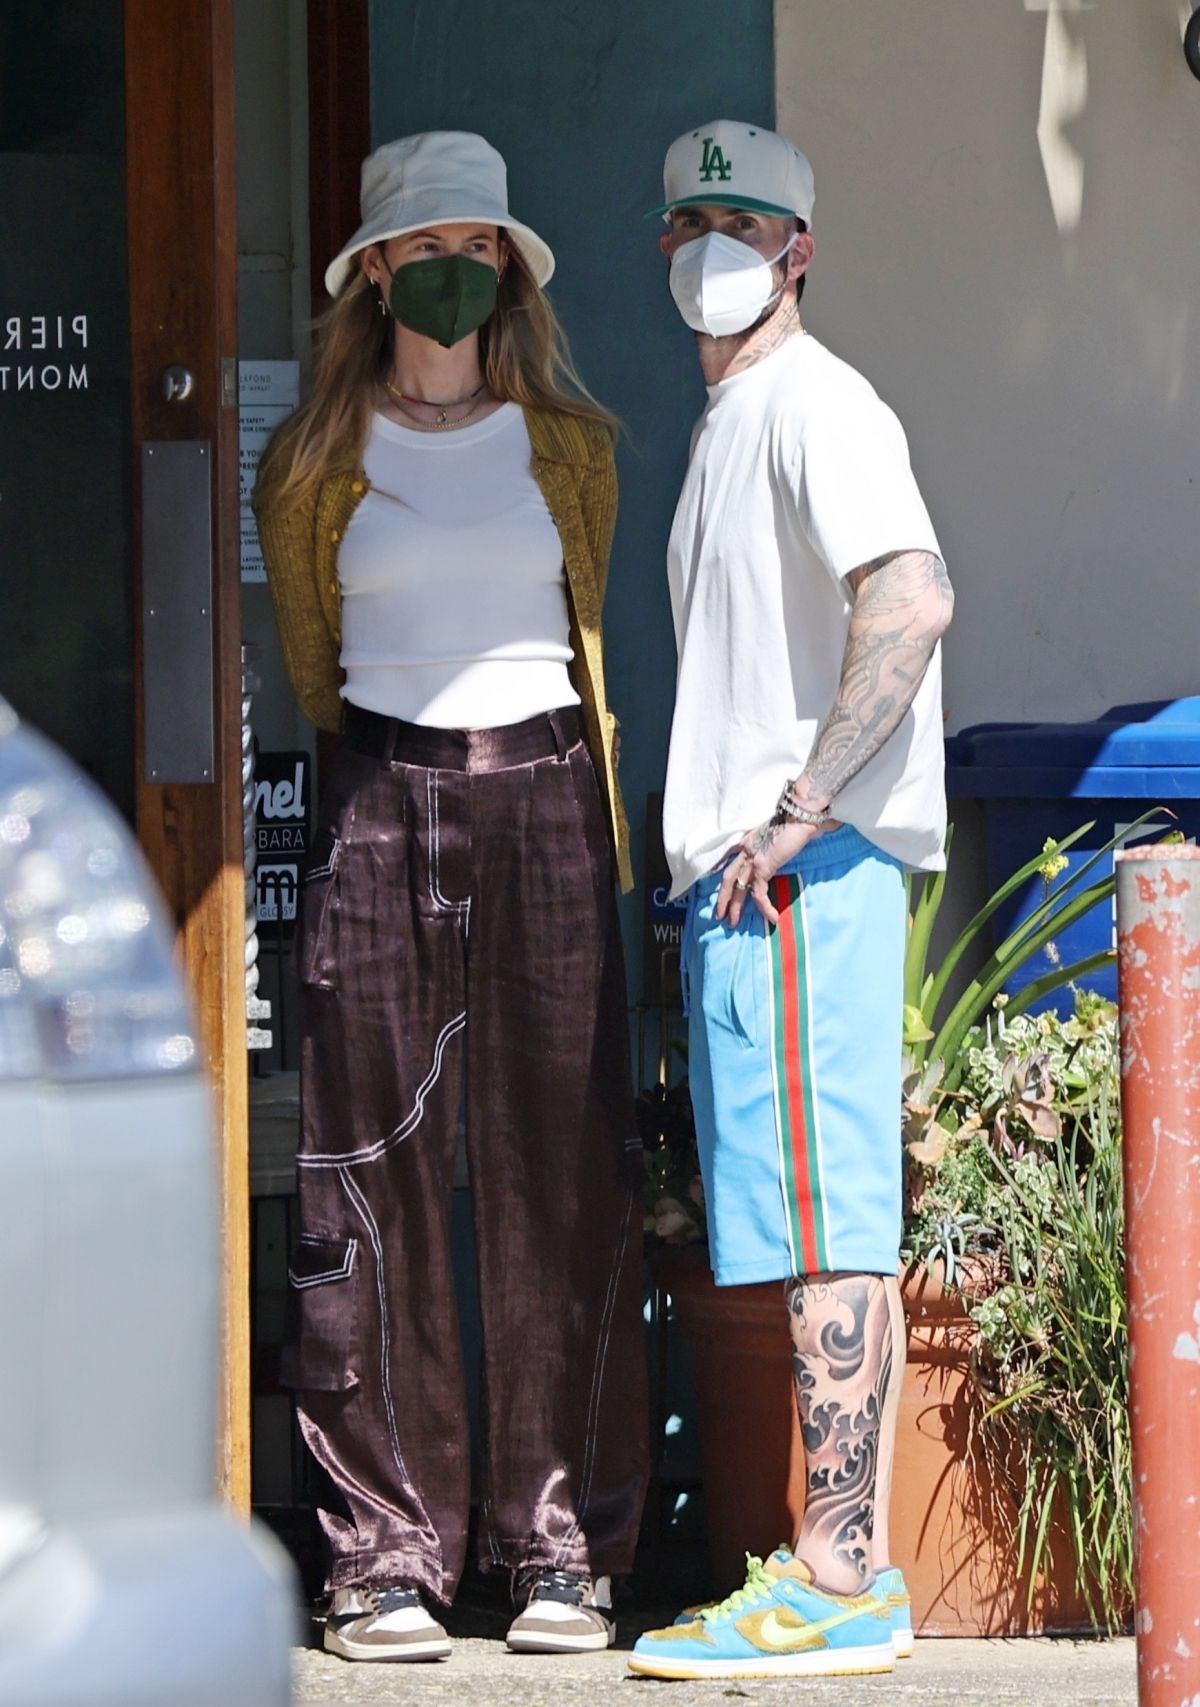 behati-prinsloo-and-adam-levine-out-in-montecito-03-21-2021-0.jpg